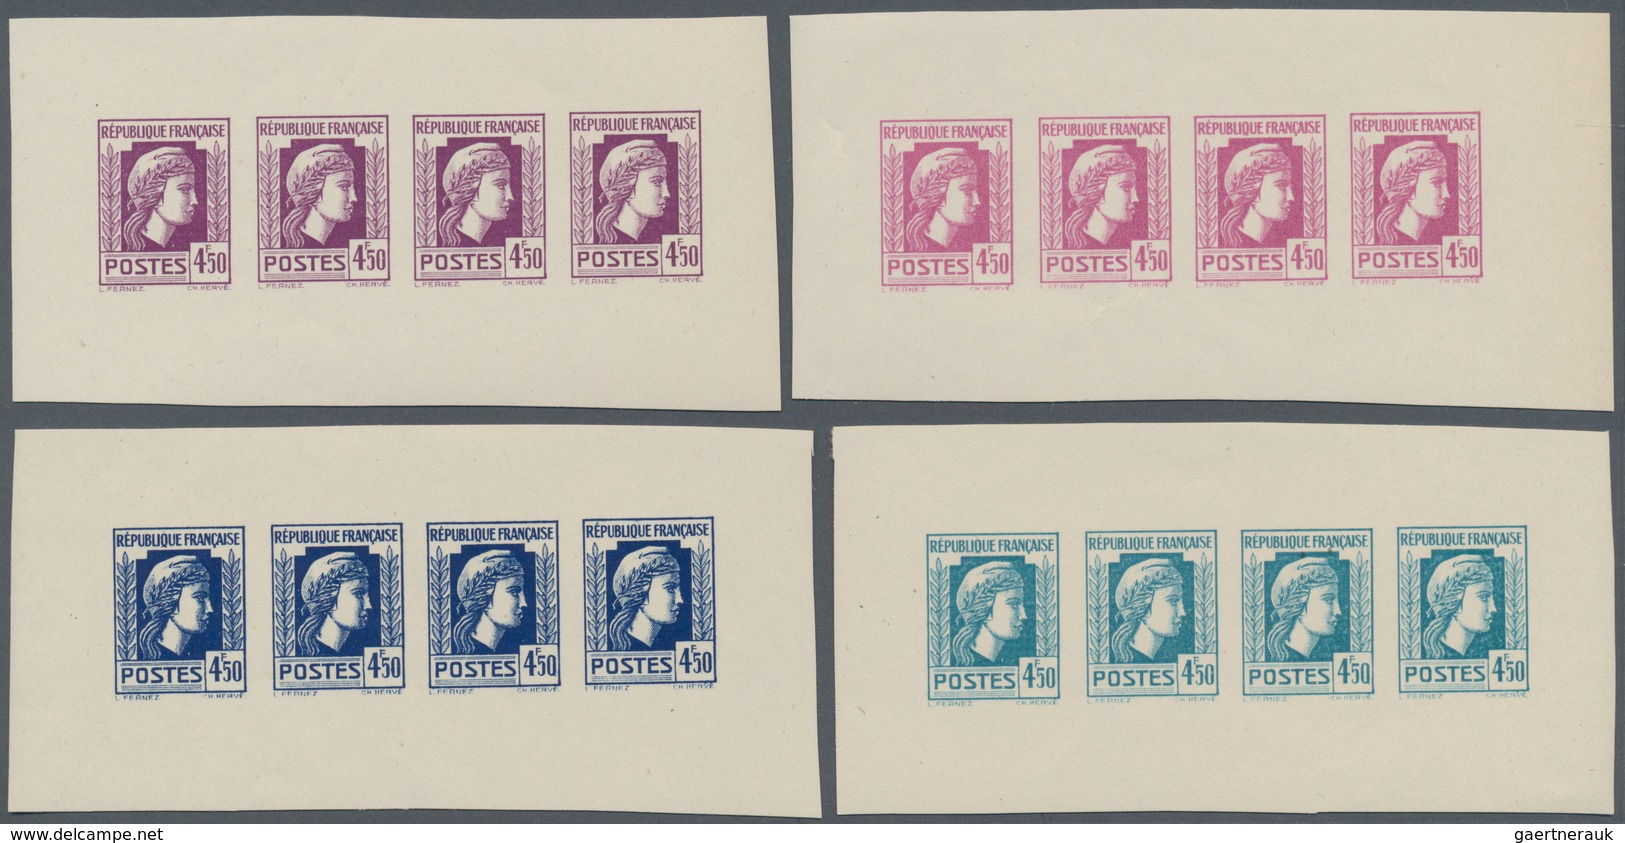 Frankreich: 1944, Definitives "Marianne", Not Issued, 4.50fr., Group Of Four Imperforated Panes Of F - Ungebraucht